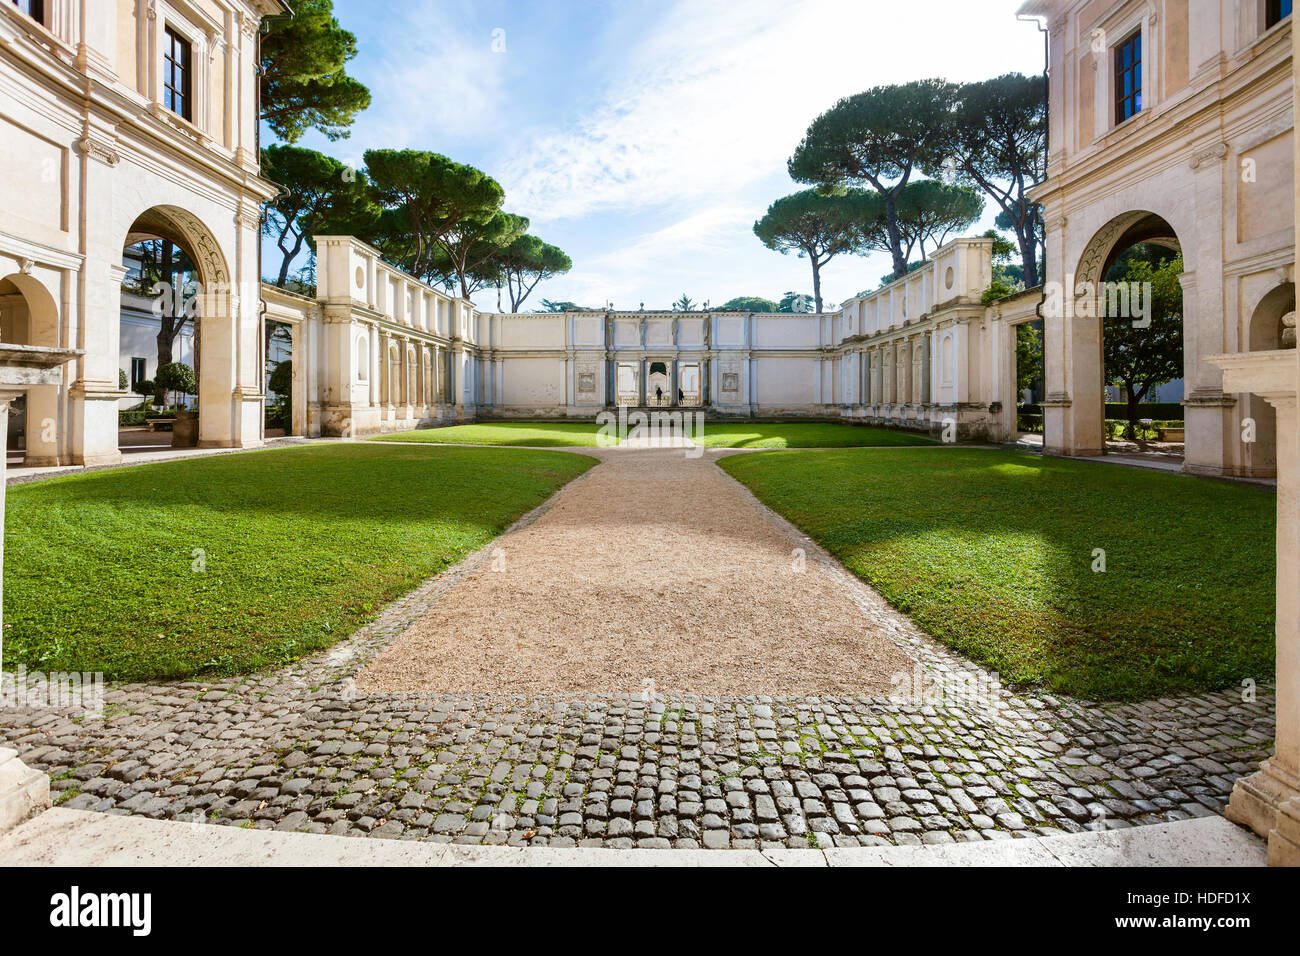 ROME, ITALY - NOVEMBER 1, 2016: courtyard of Villa Giulia, houses Museo Nazionale Etrusco (National Etruscan Museum), big collection of Etruscan art a Stock Photo